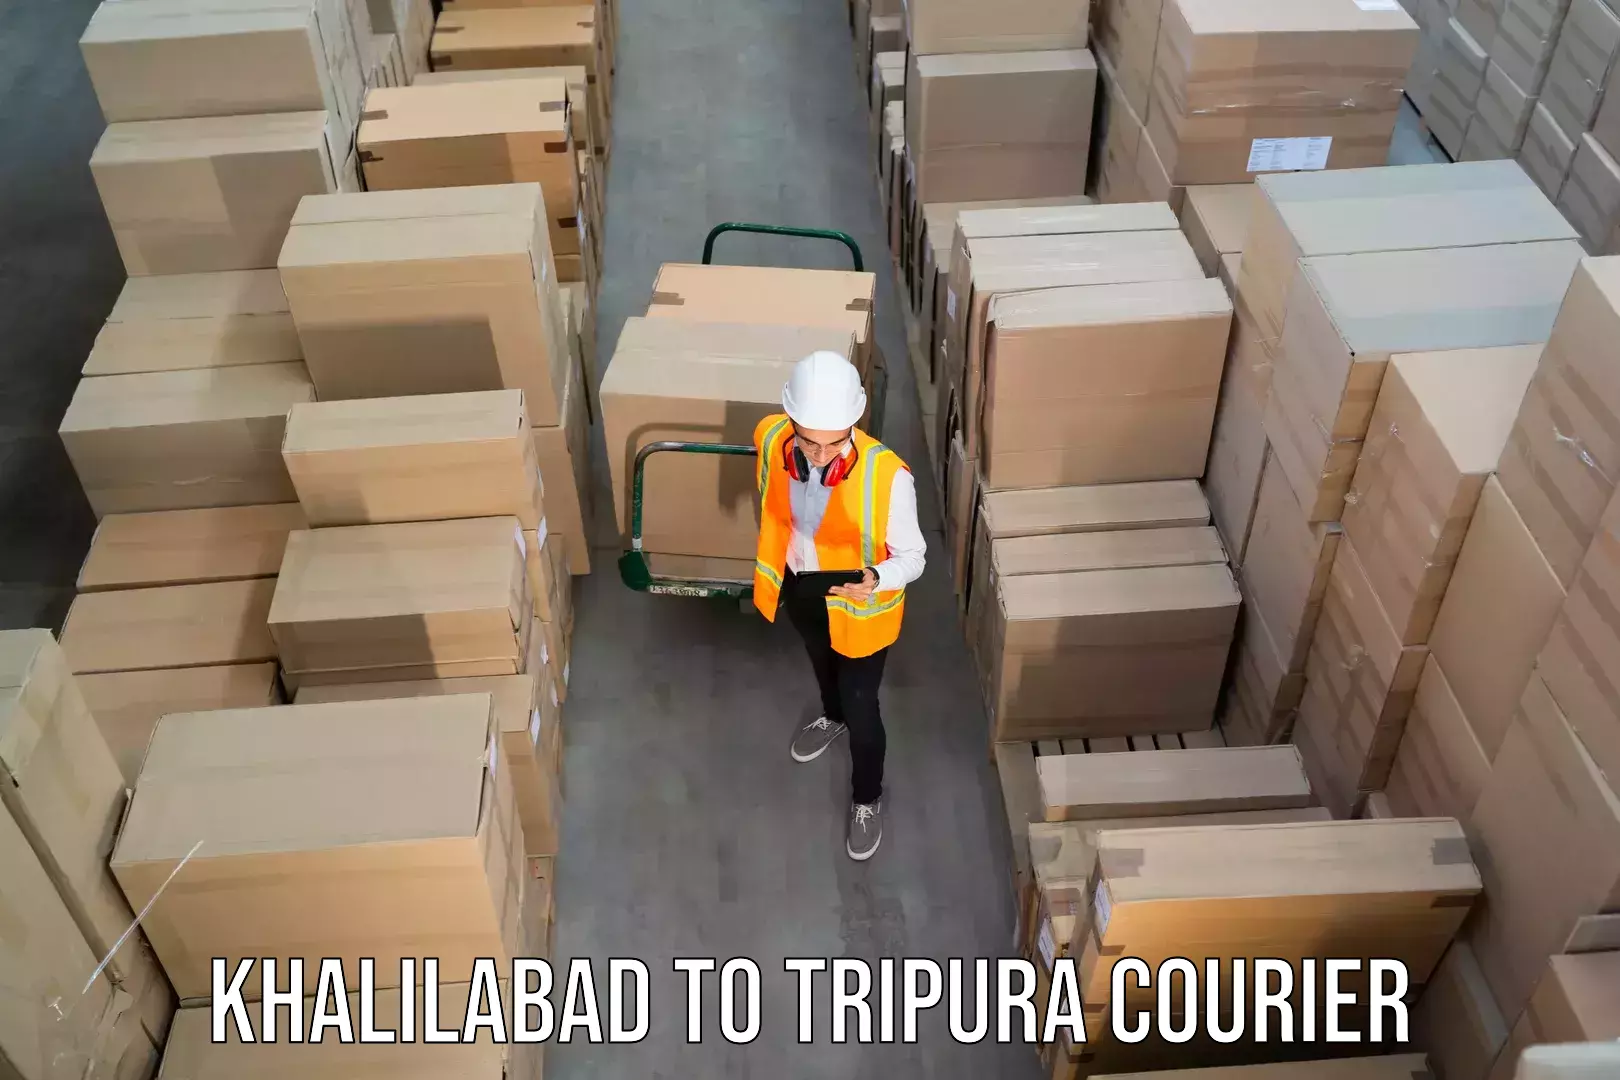 24/7 courier service Khalilabad to Tripura